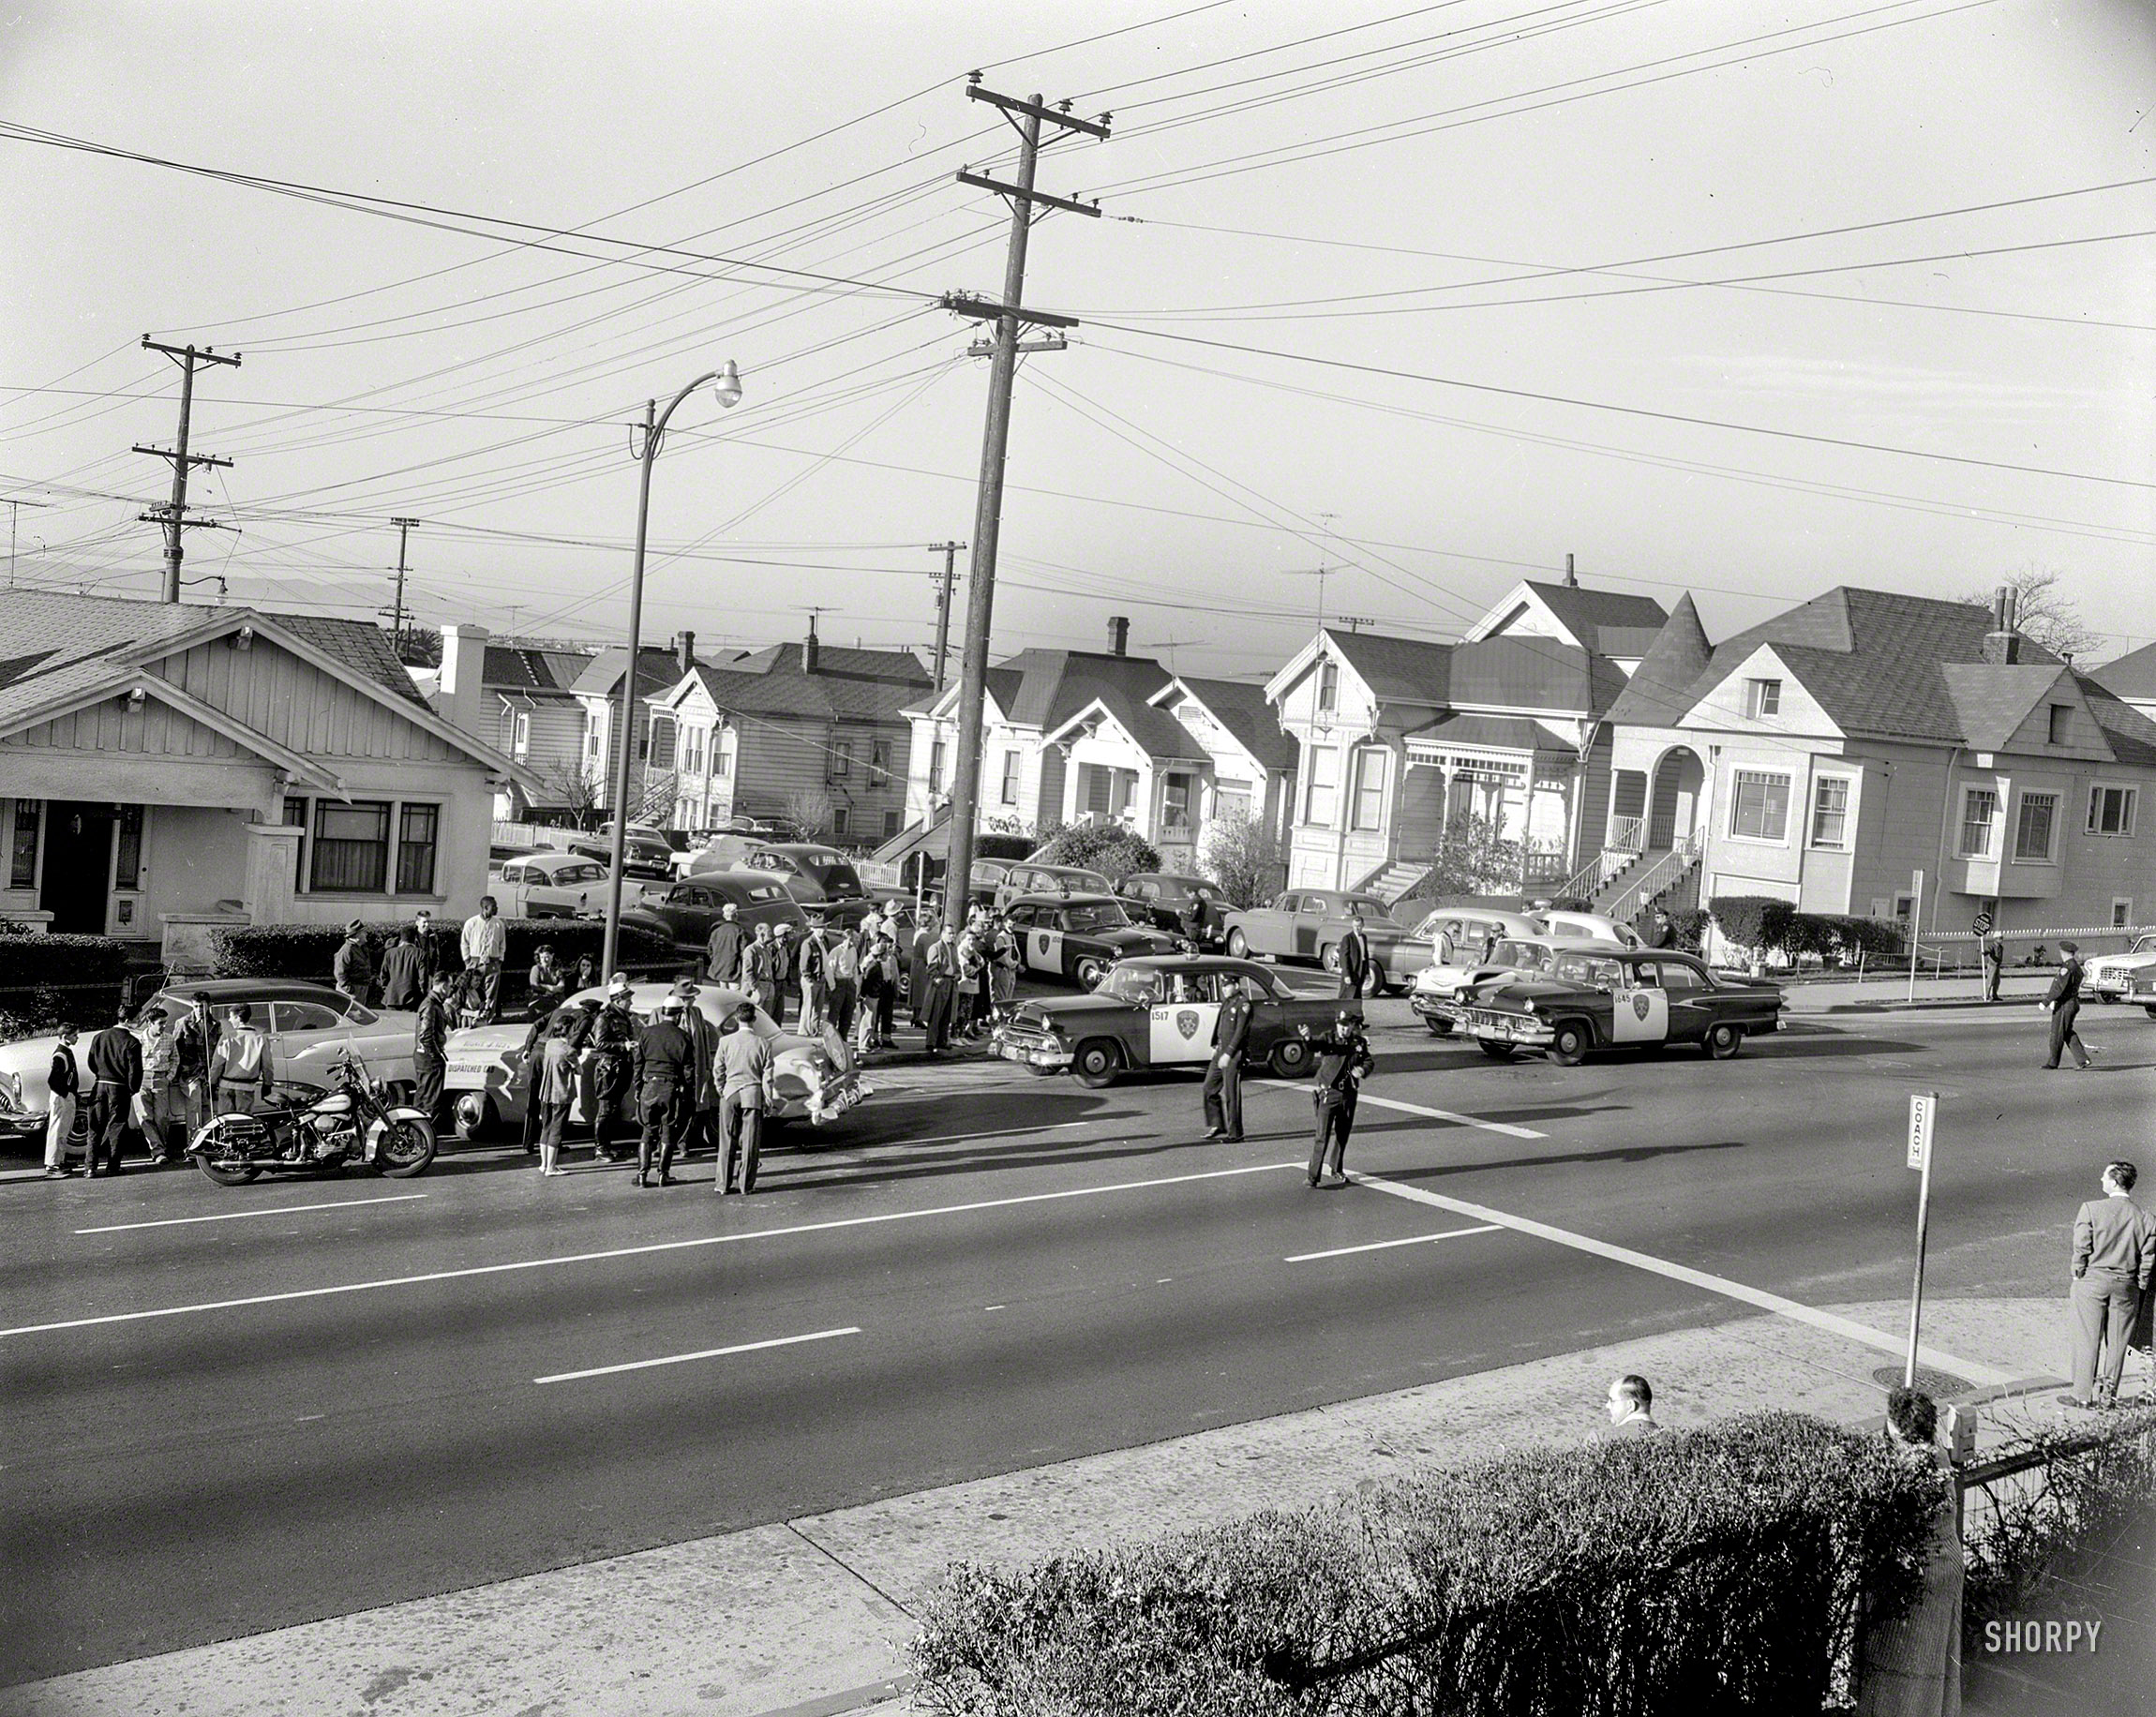 Oakland, Calif., circa 1957. "Wrecked taxi at school crossing." Note the crossing guard at right. Featured players in this curbside drama include a 1957 Chevy, Plymouth taxicab and (yet again) 1953 Buick, supported by a trio of 1955 and '56 Ford police cars. 4x5 acetate negative from the News Archive. View full size.